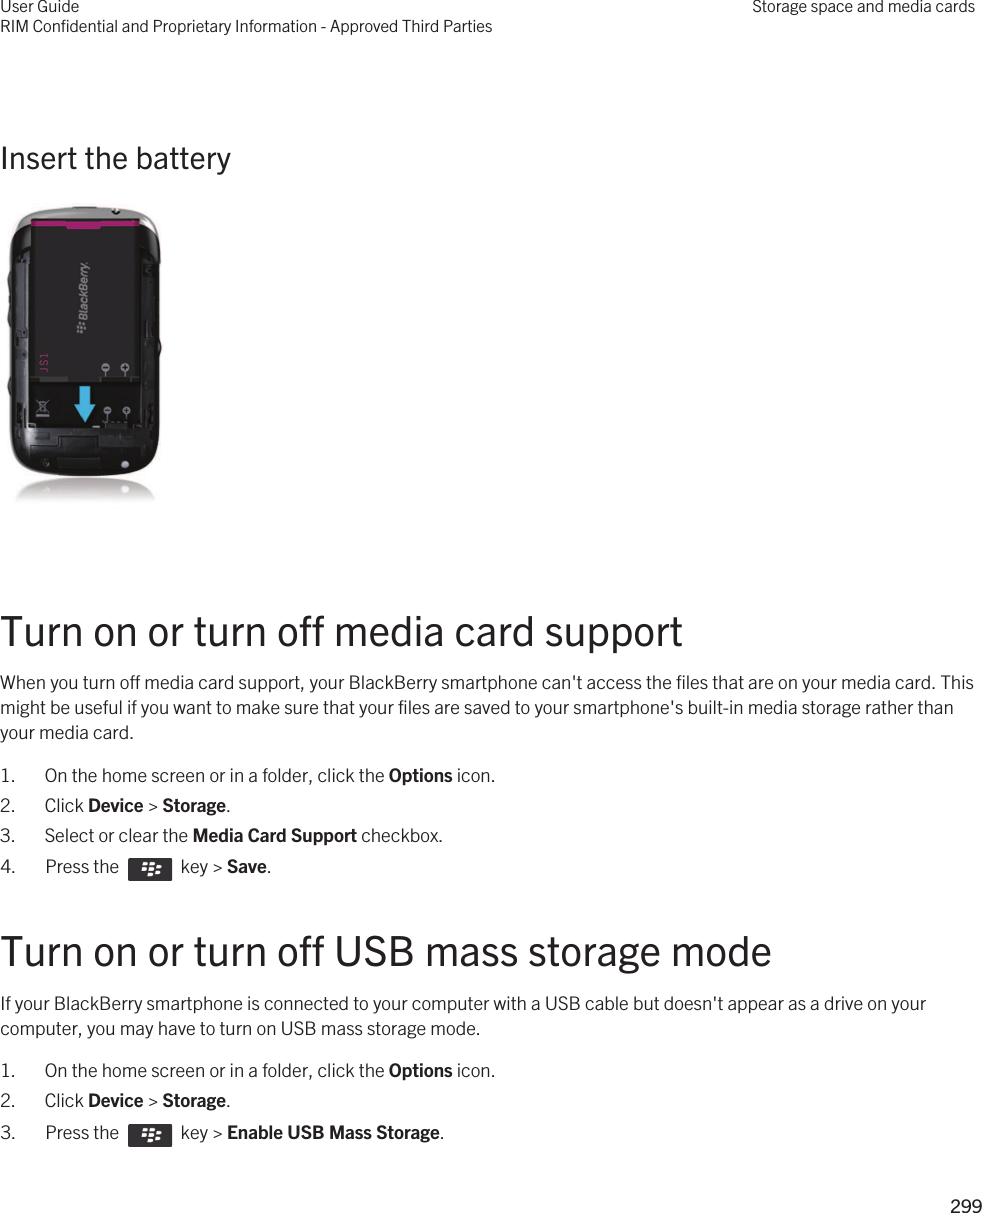  Insert the battery  Turn on or turn off media card supportWhen you turn off media card support, your BlackBerry smartphone can&apos;t access the files that are on your media card. This might be useful if you want to make sure that your files are saved to your smartphone&apos;s built-in media storage rather than your media card.1. On the home screen or in a folder, click the Options icon.2. Click Device &gt; Storage.3. Select or clear the Media Card Support checkbox.4.  Press the    key &gt; Save. Turn on or turn off USB mass storage modeIf your BlackBerry smartphone is connected to your computer with a USB cable but doesn&apos;t appear as a drive on your computer, you may have to turn on USB mass storage mode.1. On the home screen or in a folder, click the Options icon.2. Click Device &gt; Storage.3.  Press the    key &gt; Enable USB Mass Storage. User GuideRIM Confidential and Proprietary Information - Approved Third PartiesStorage space and media cards299 